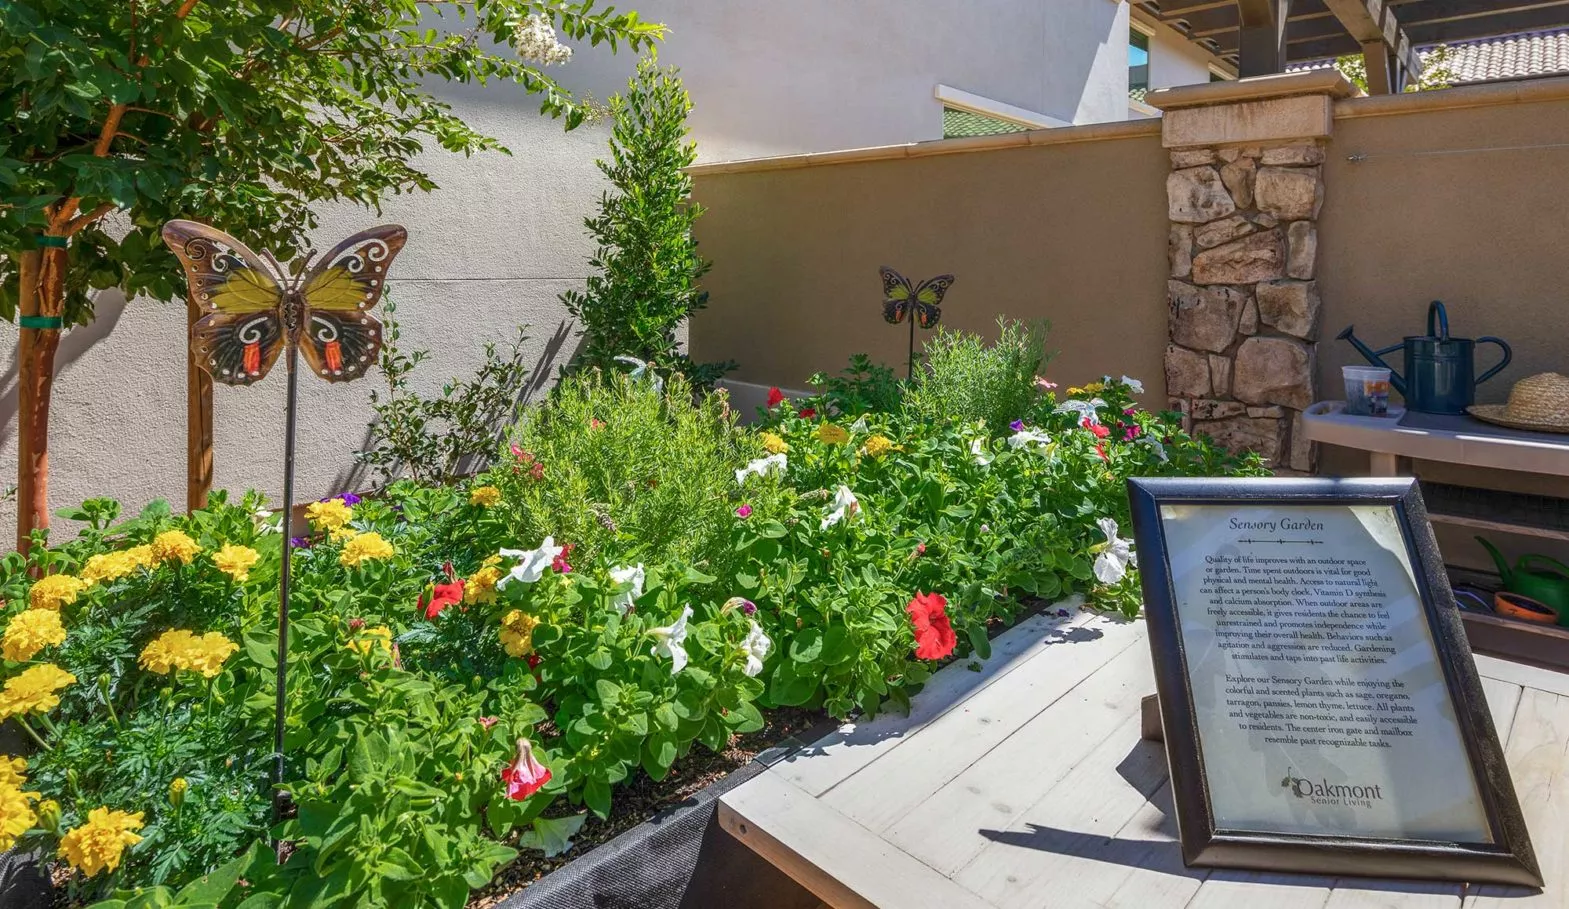 The terraces sensory garden with a planter with flowers and decorative butterflies